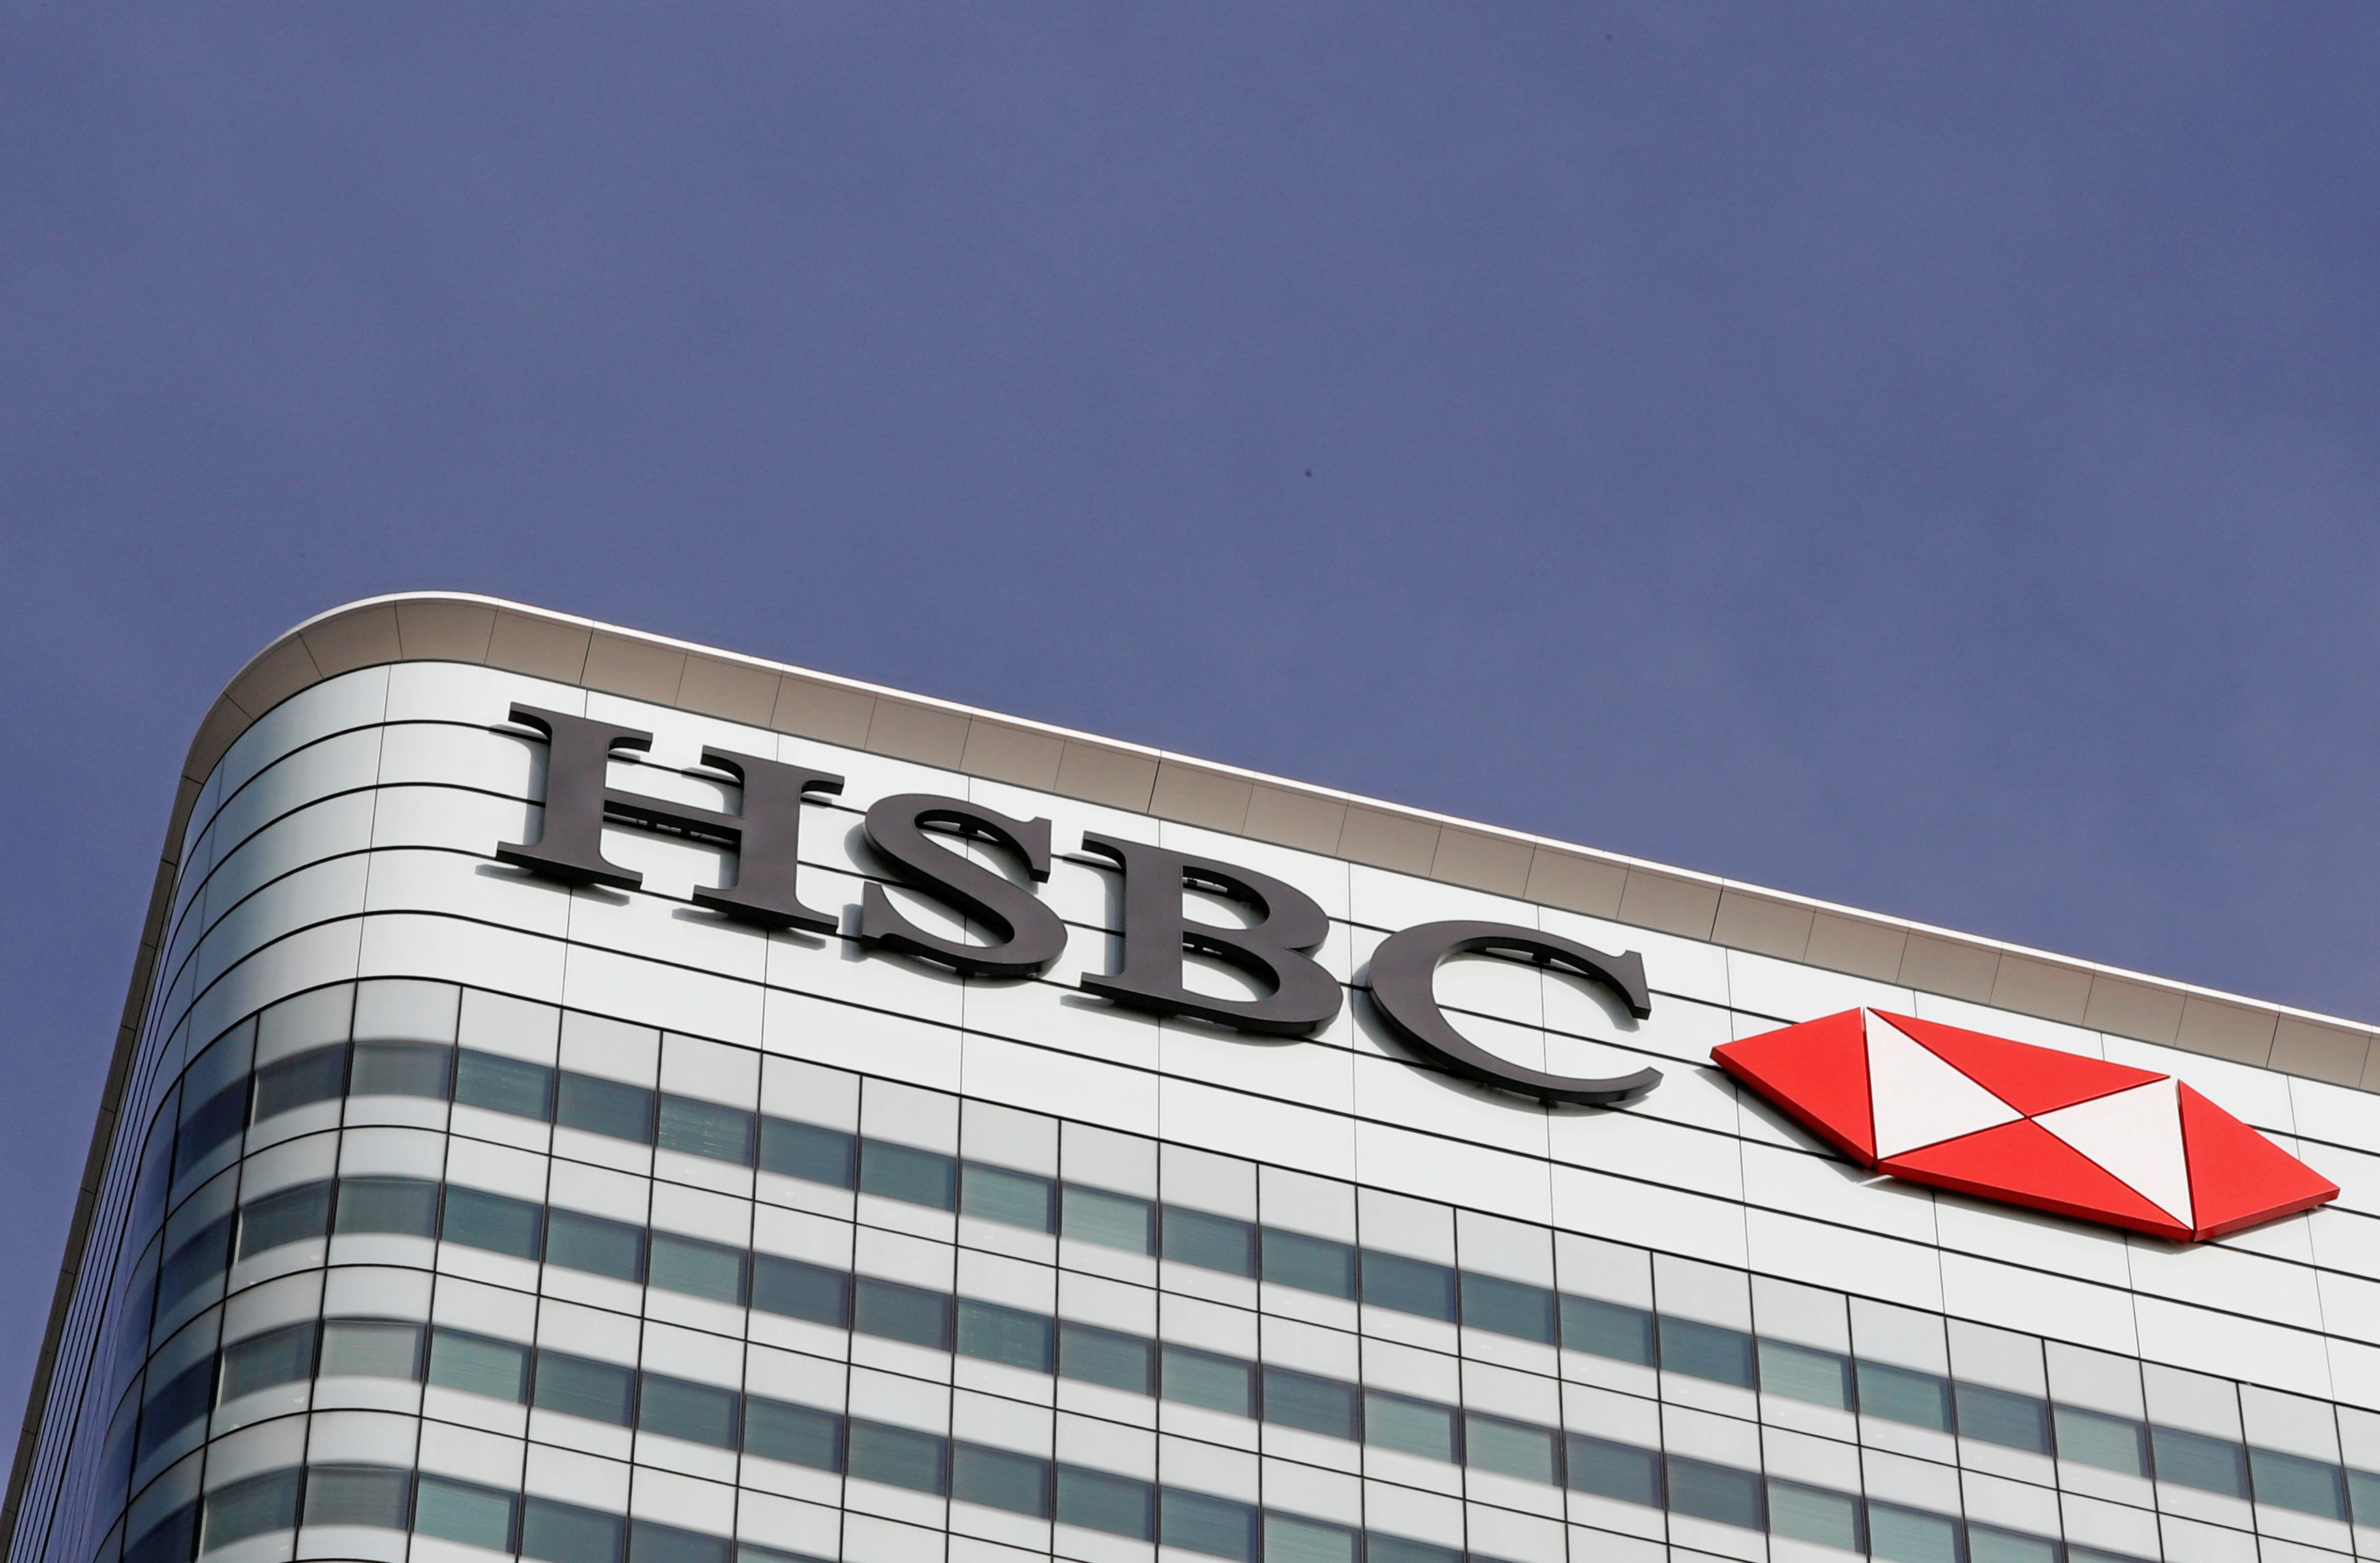 FILE PHOTO - The HSBC bank logo is seen at their offices in the Canary Wharf financial district in London